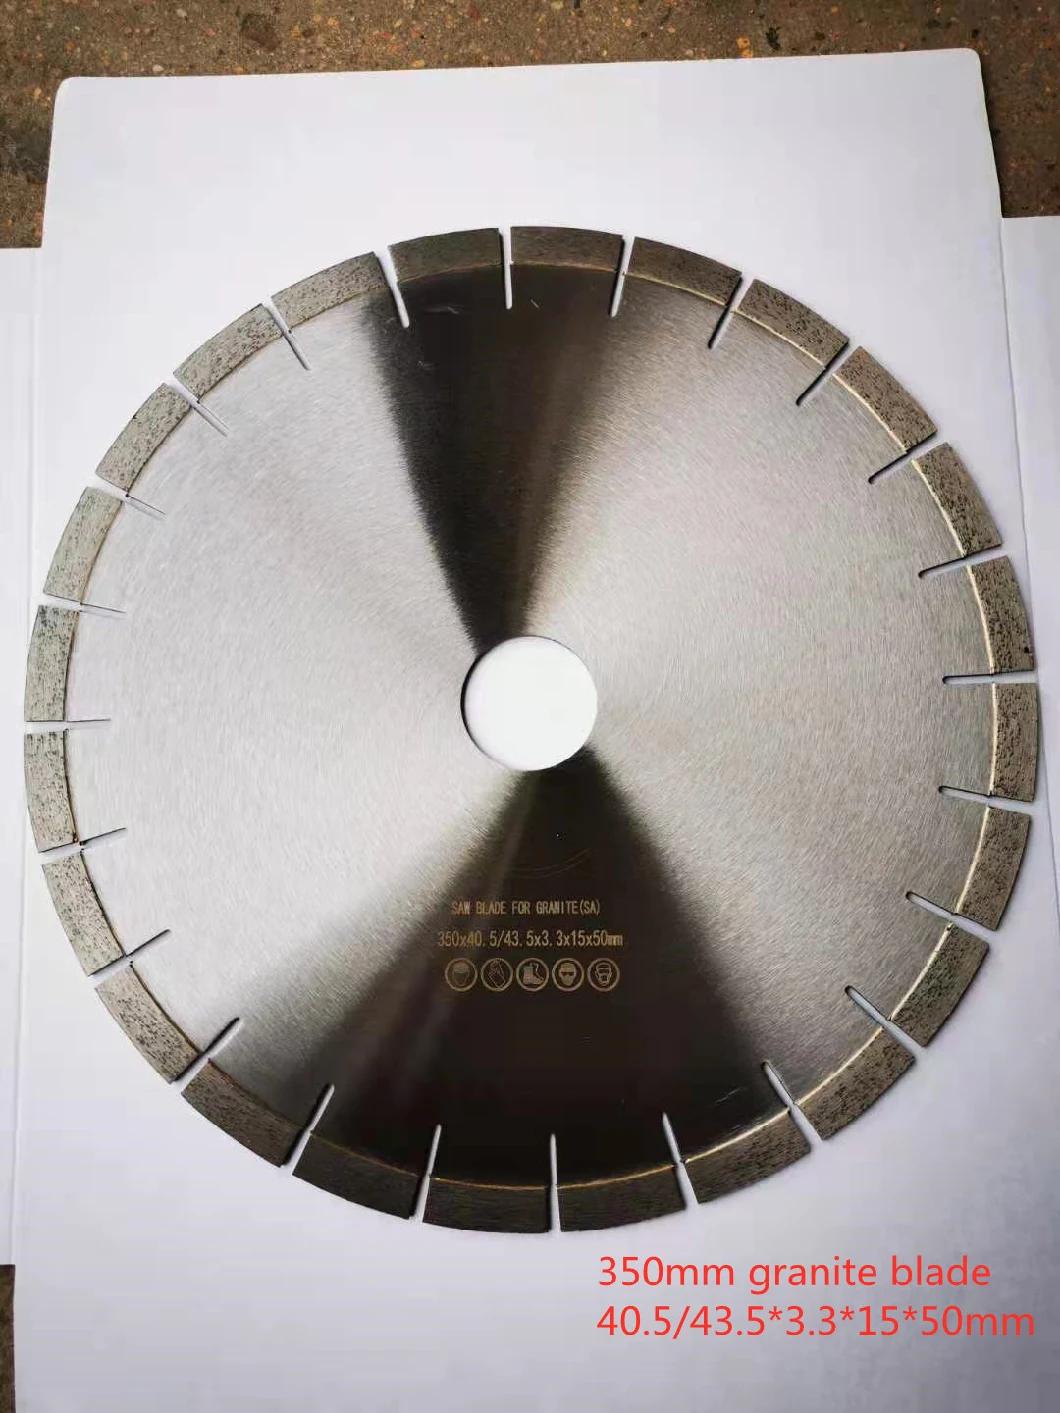 Wholesale Made in China 300mm 12inch Diamond Segment Circular Cutter High Frequency Welding Silvered Saw Blades for Cutting Granite Marble Ceramic Concrete